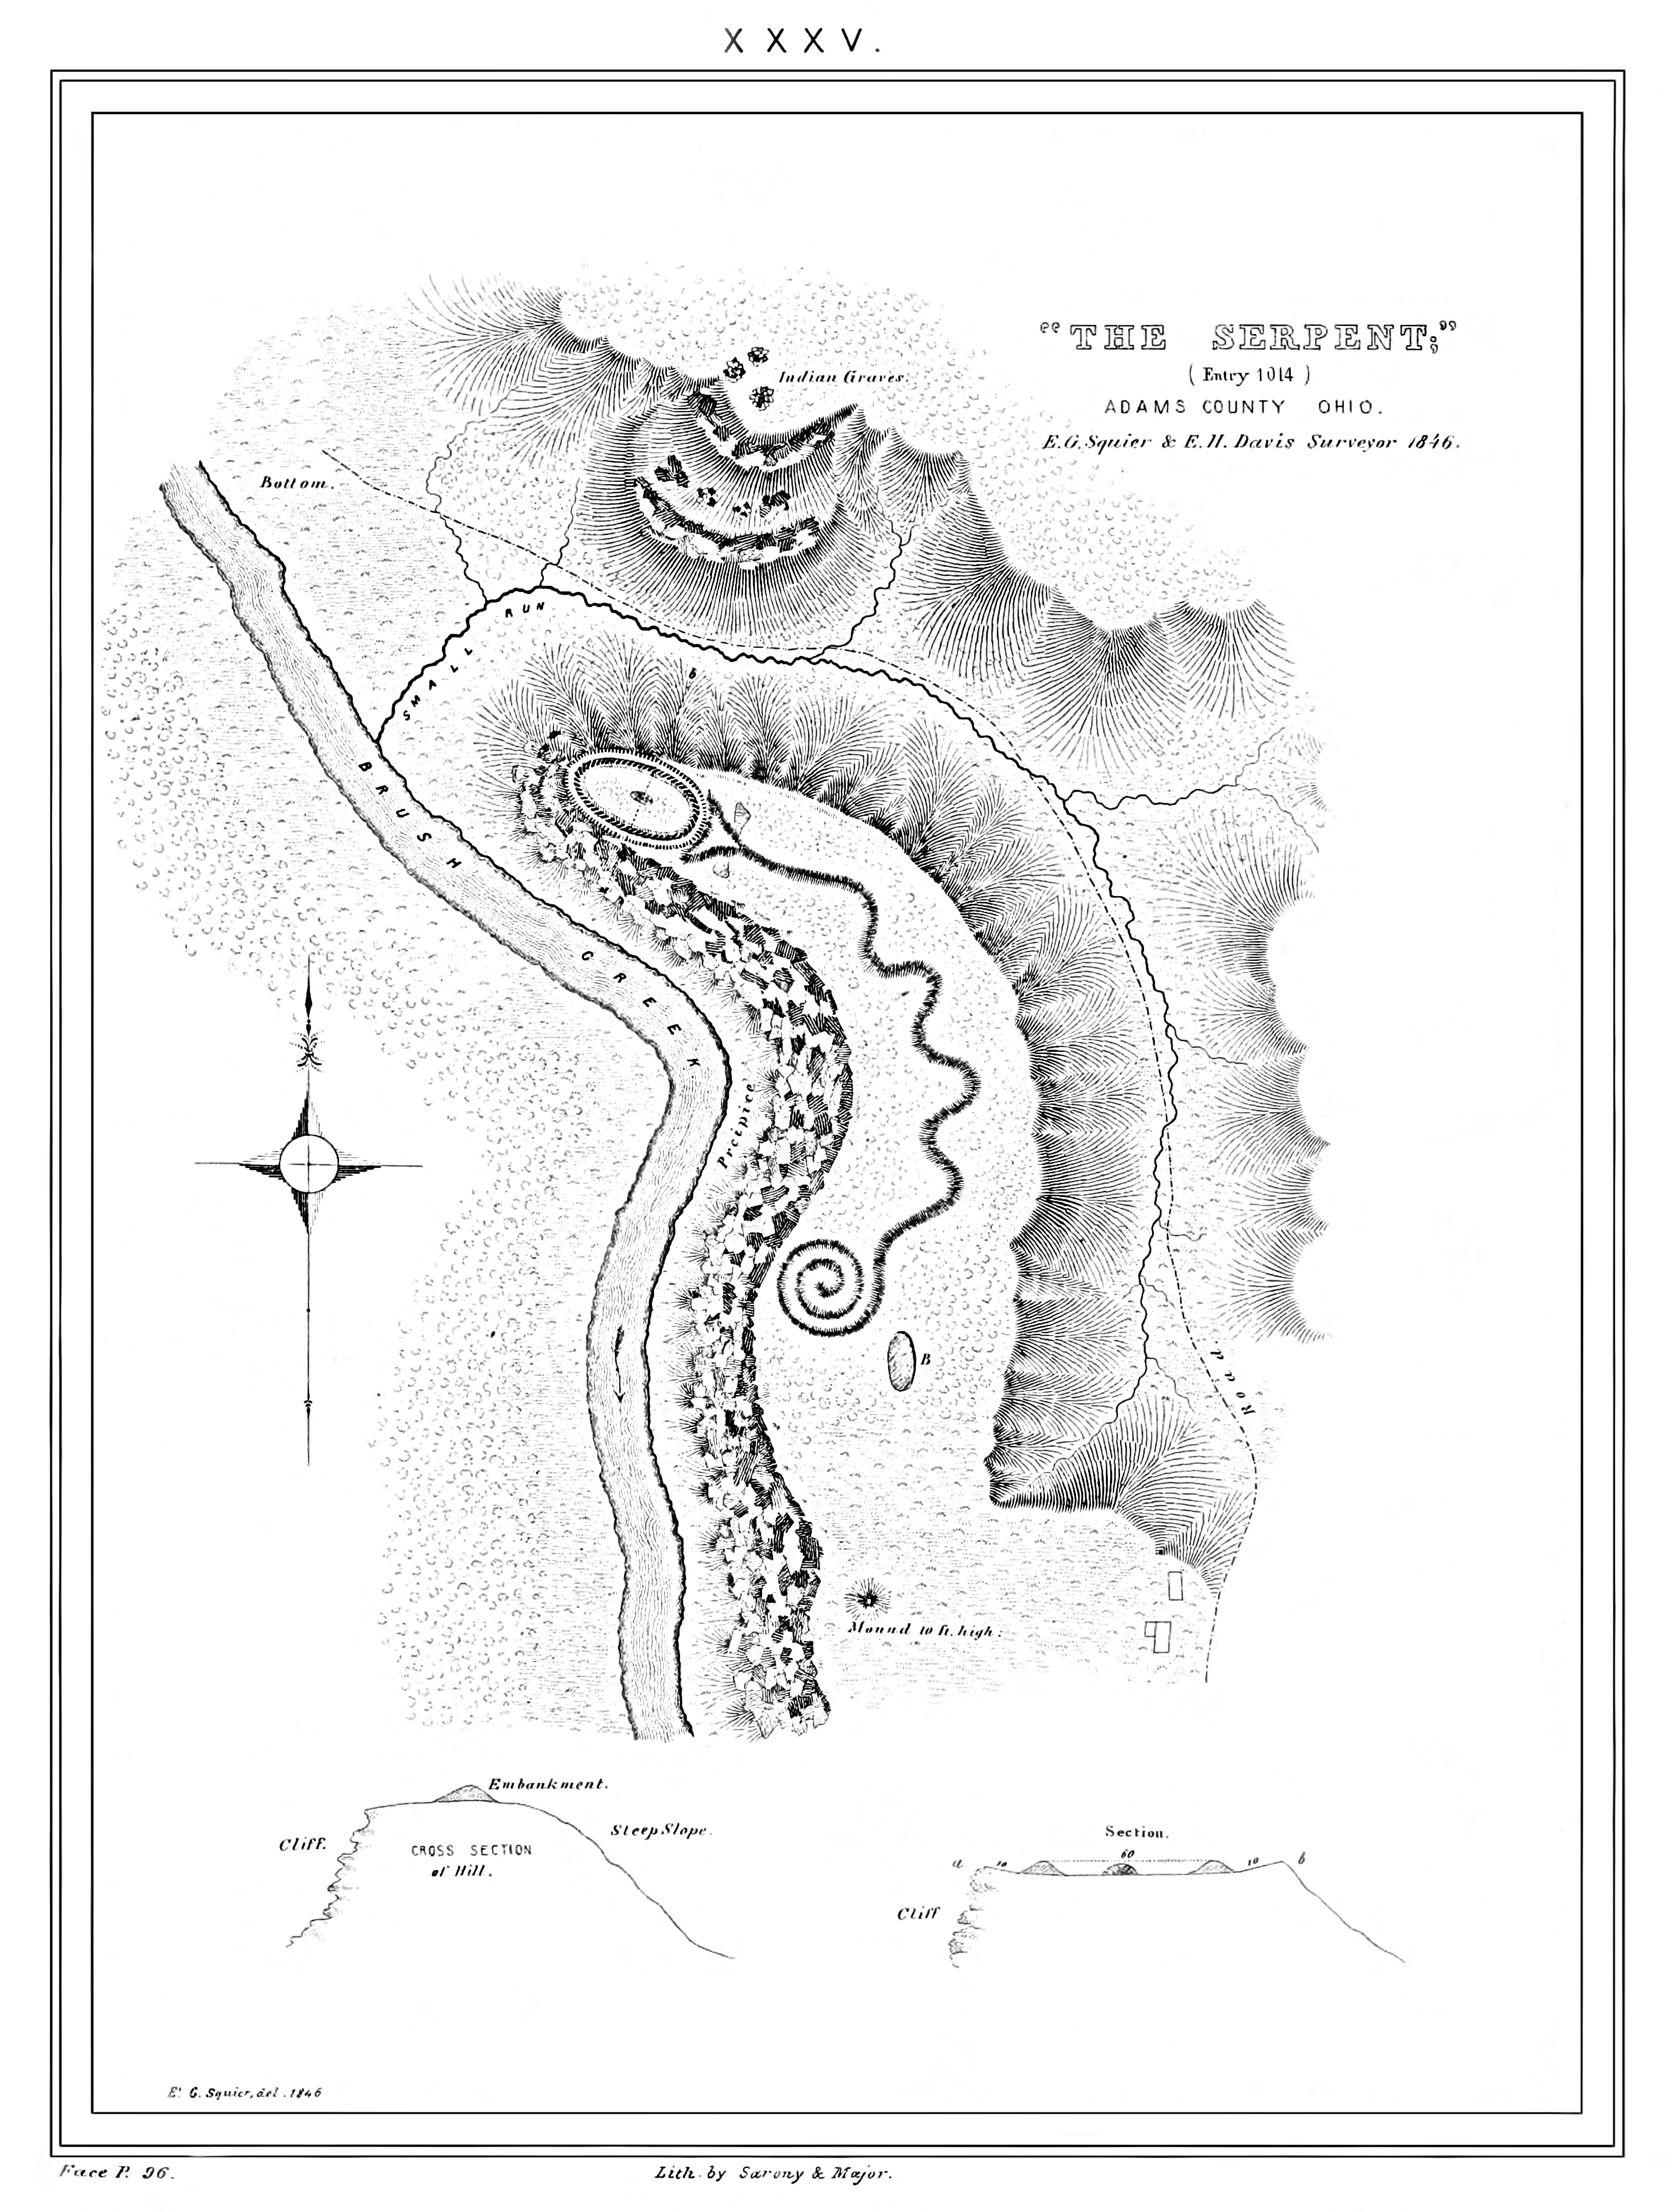 Serpent mound as depicted in 1846 by Squire and Davis